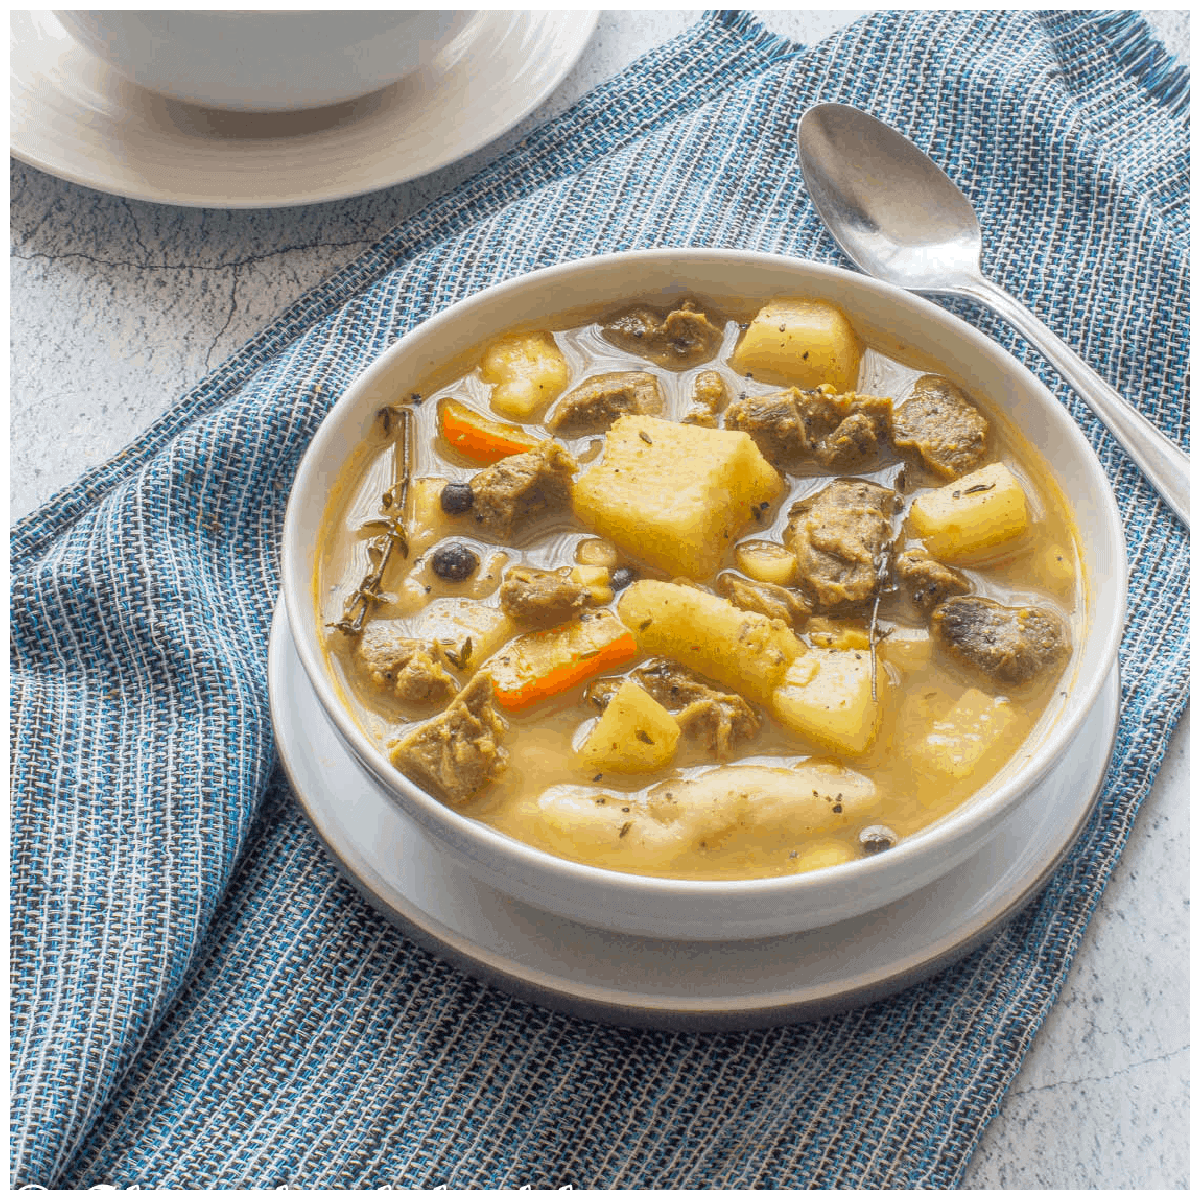 https://thatgirlcookshealthy.com/wp-content/uploads/2021/02/mutton-soup-image.png